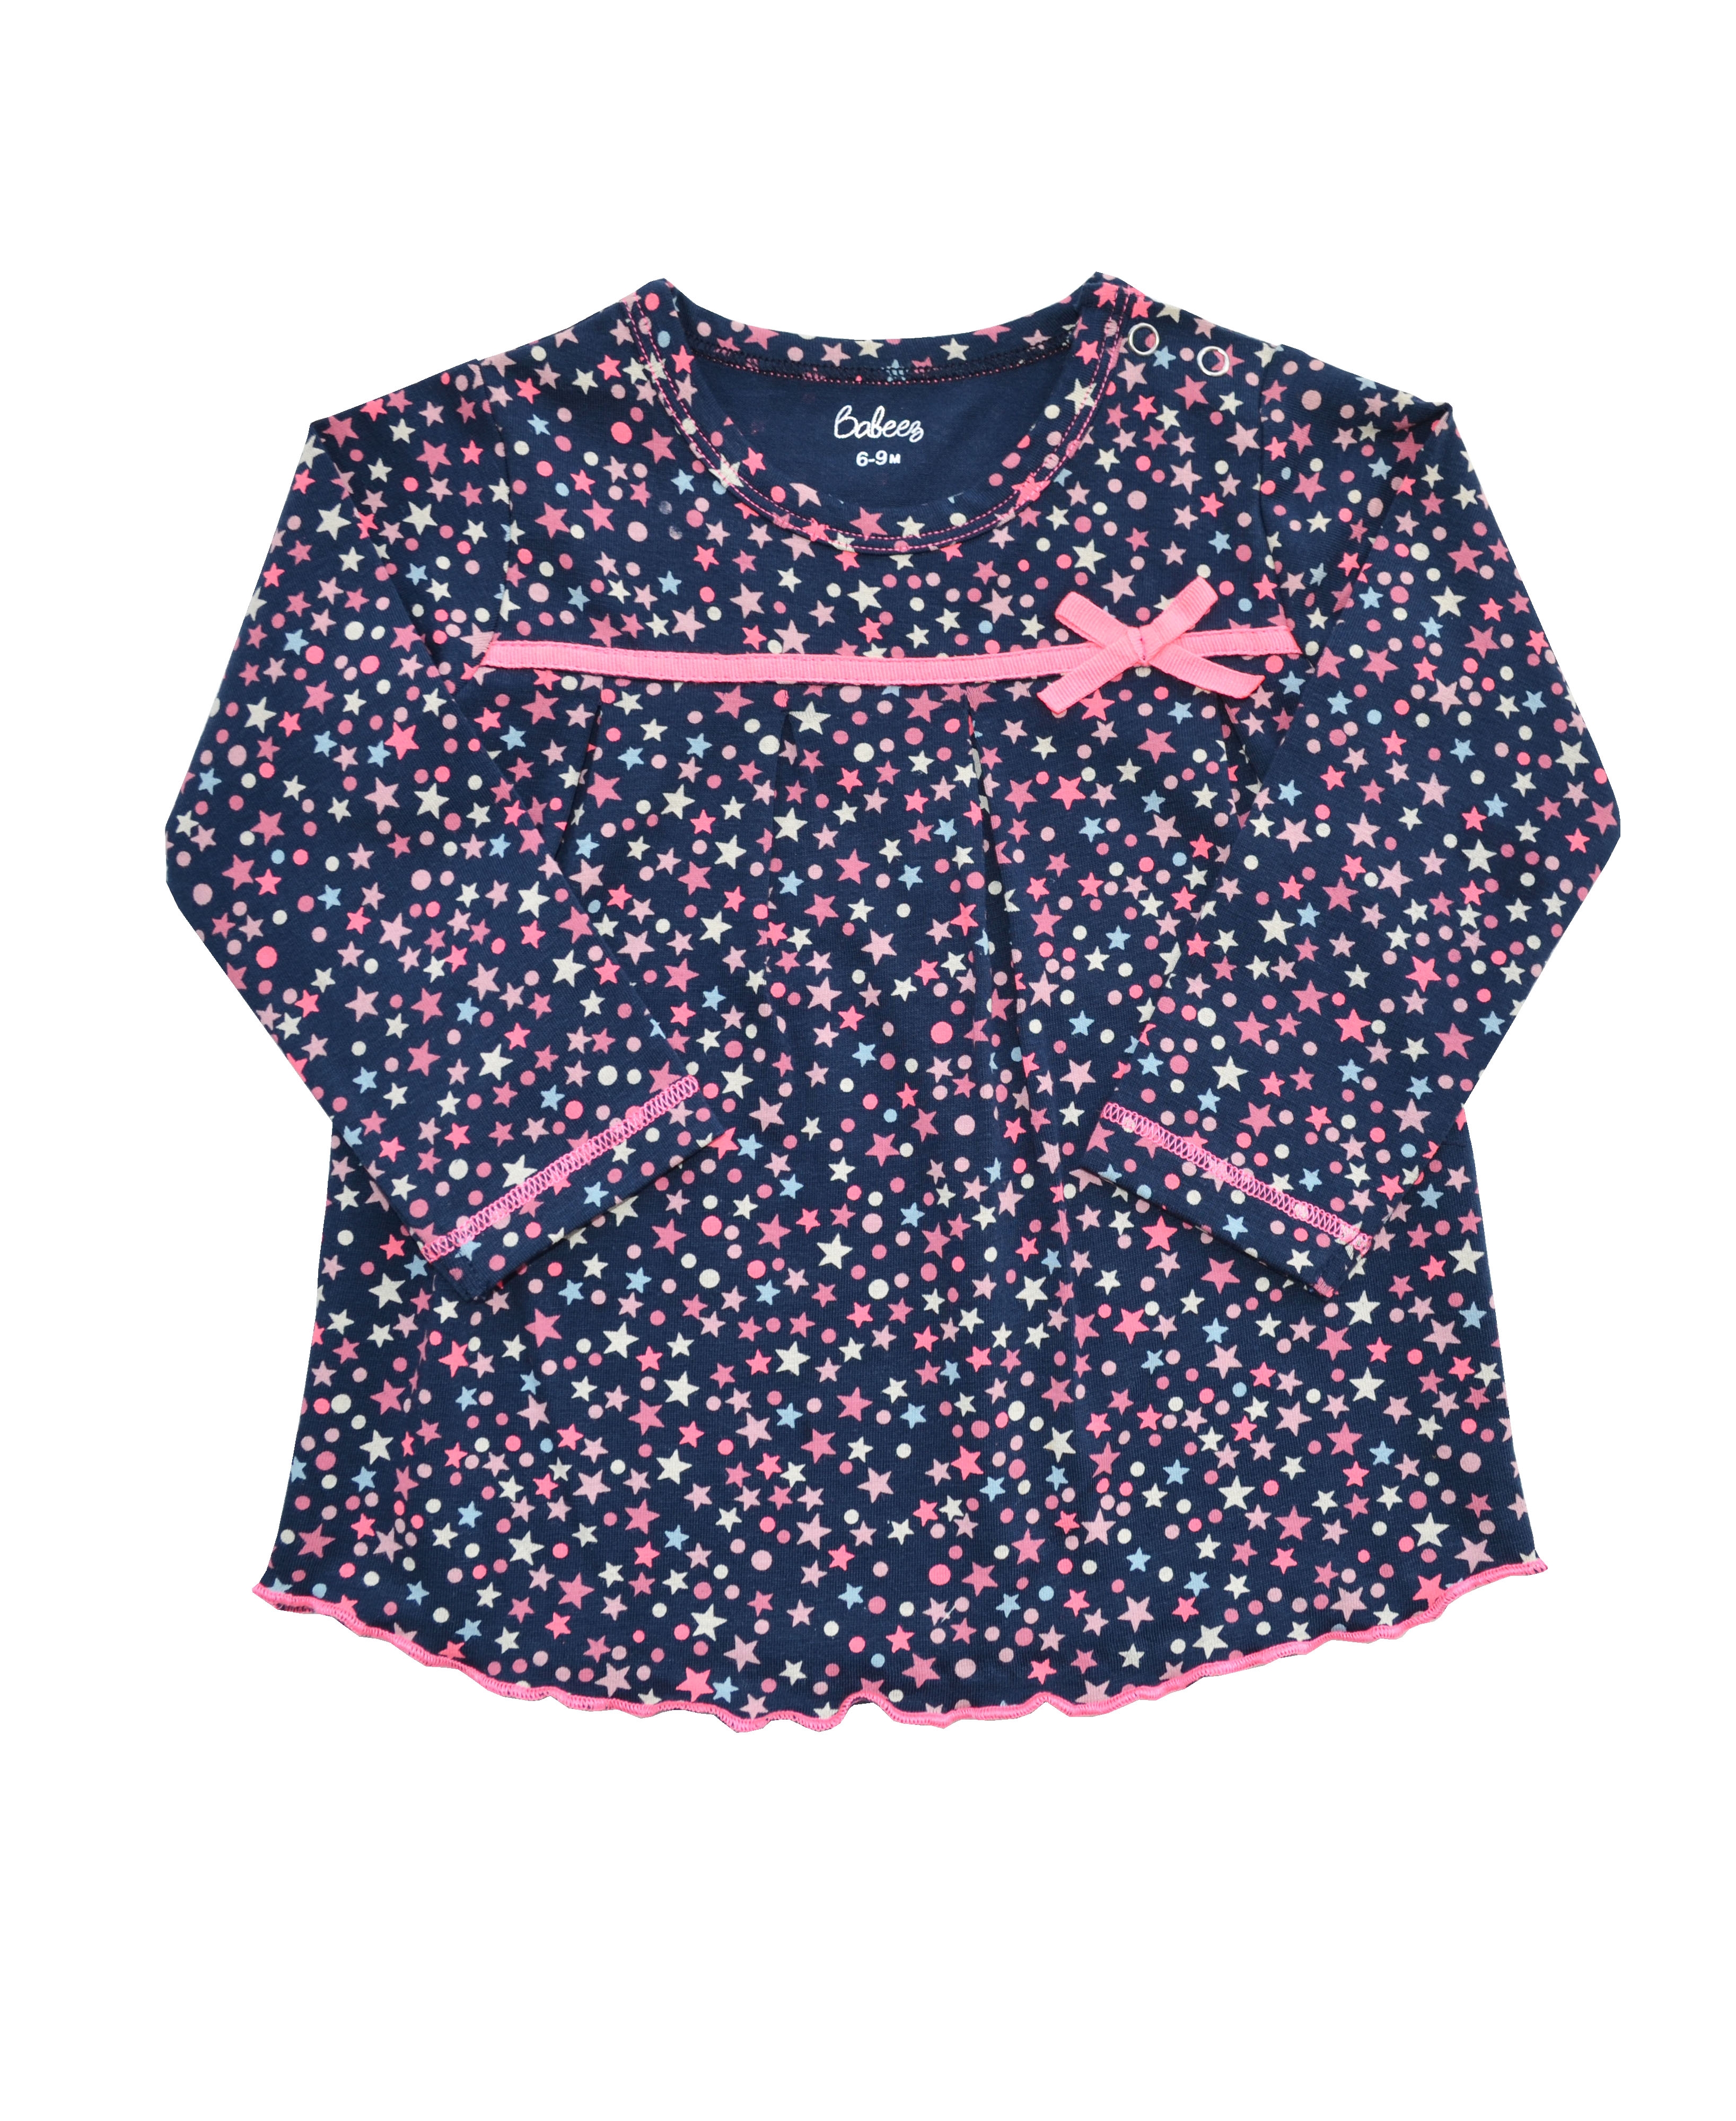 Allover Star Print on Navy Long Sleeves Top (95% Cotton 5% Elasthan Jersey)